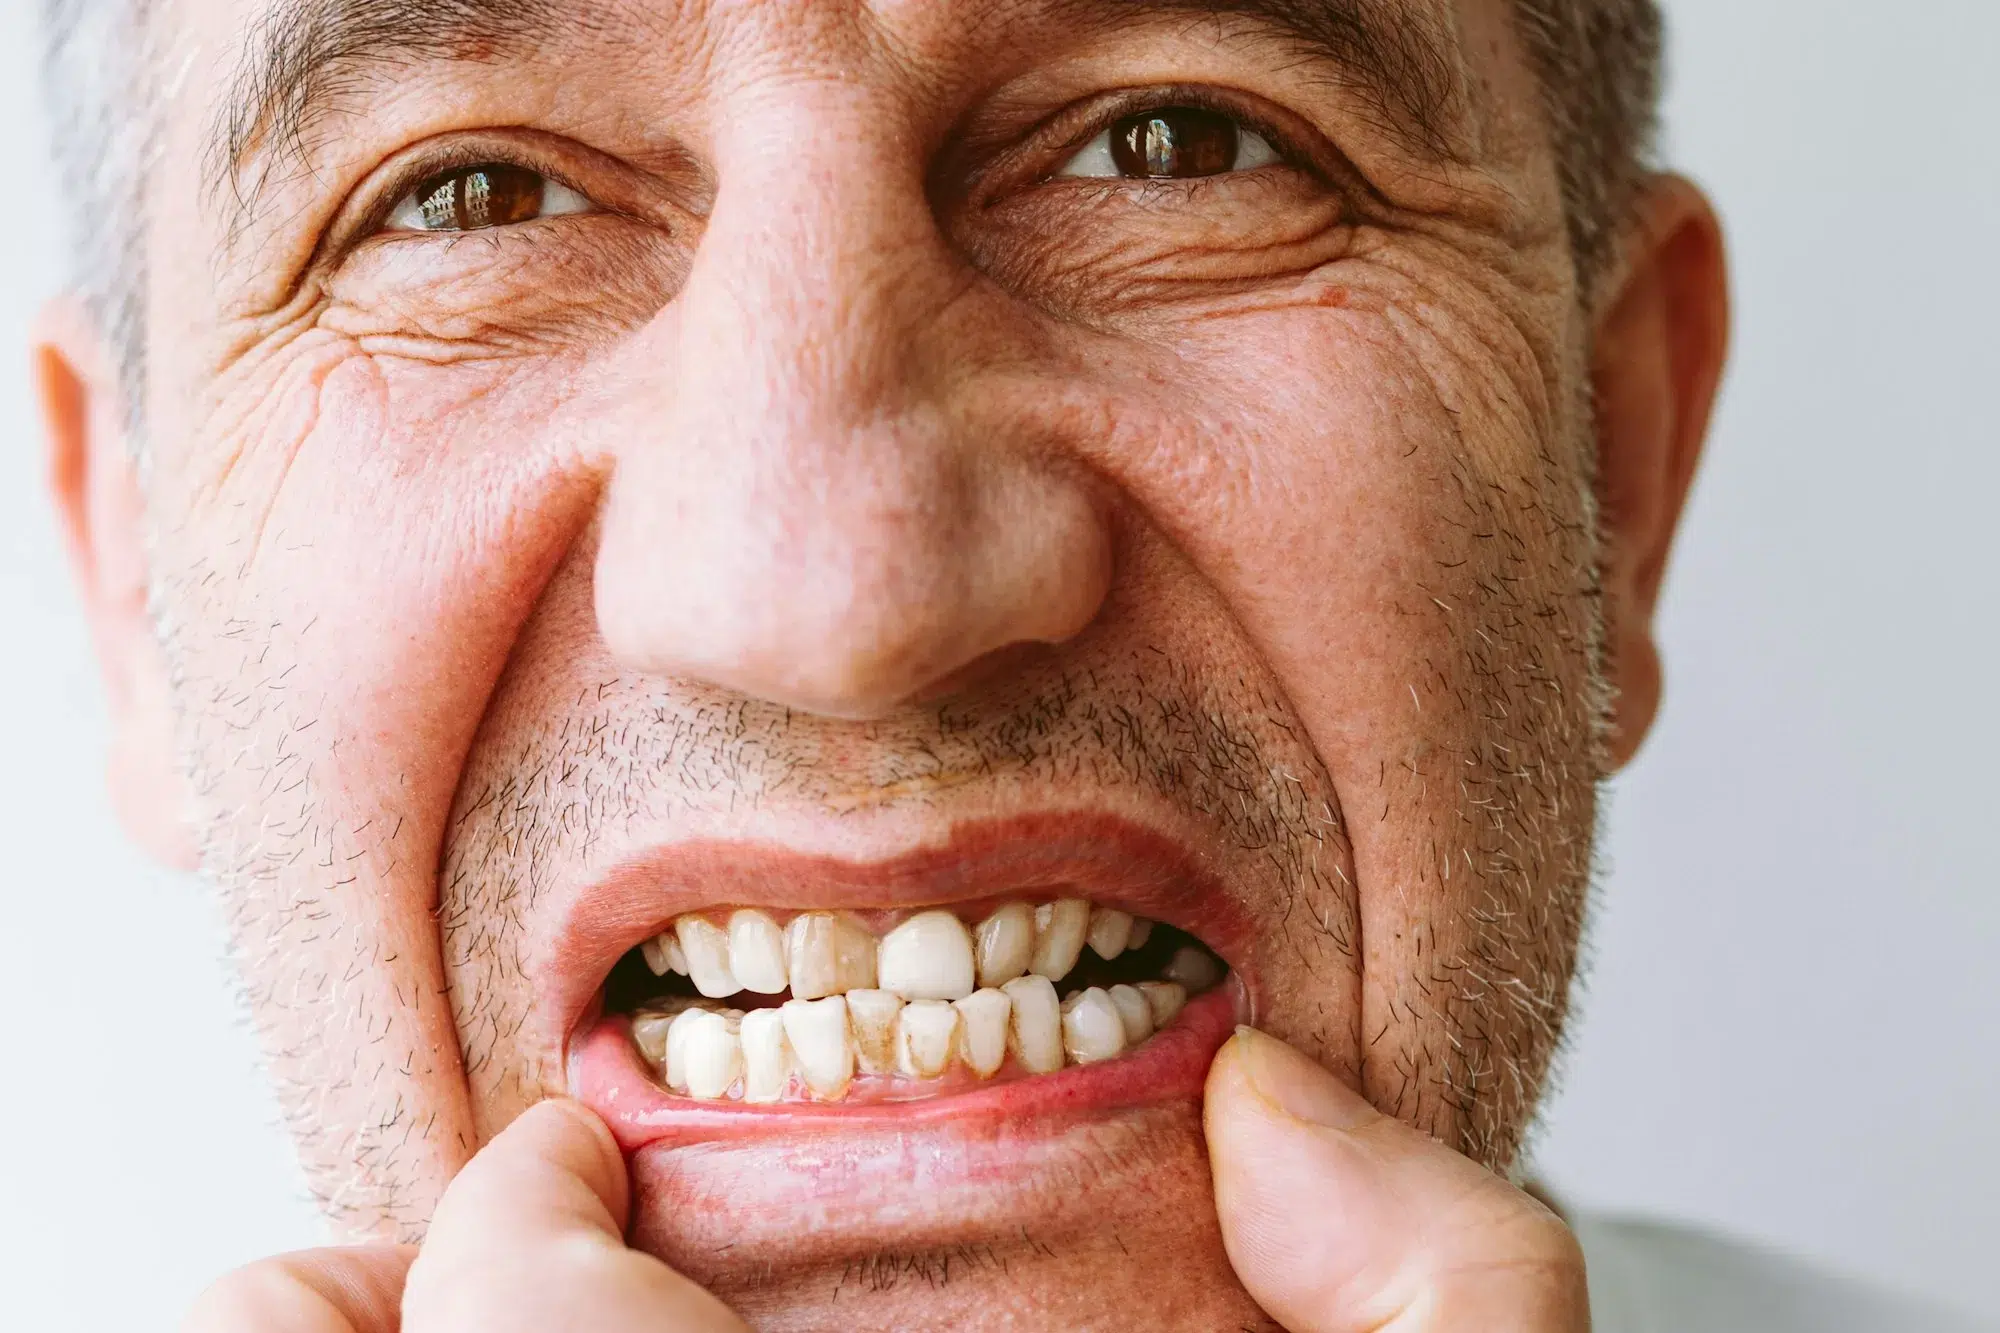 Close-up portrait of man showing teeth with tartar on white background